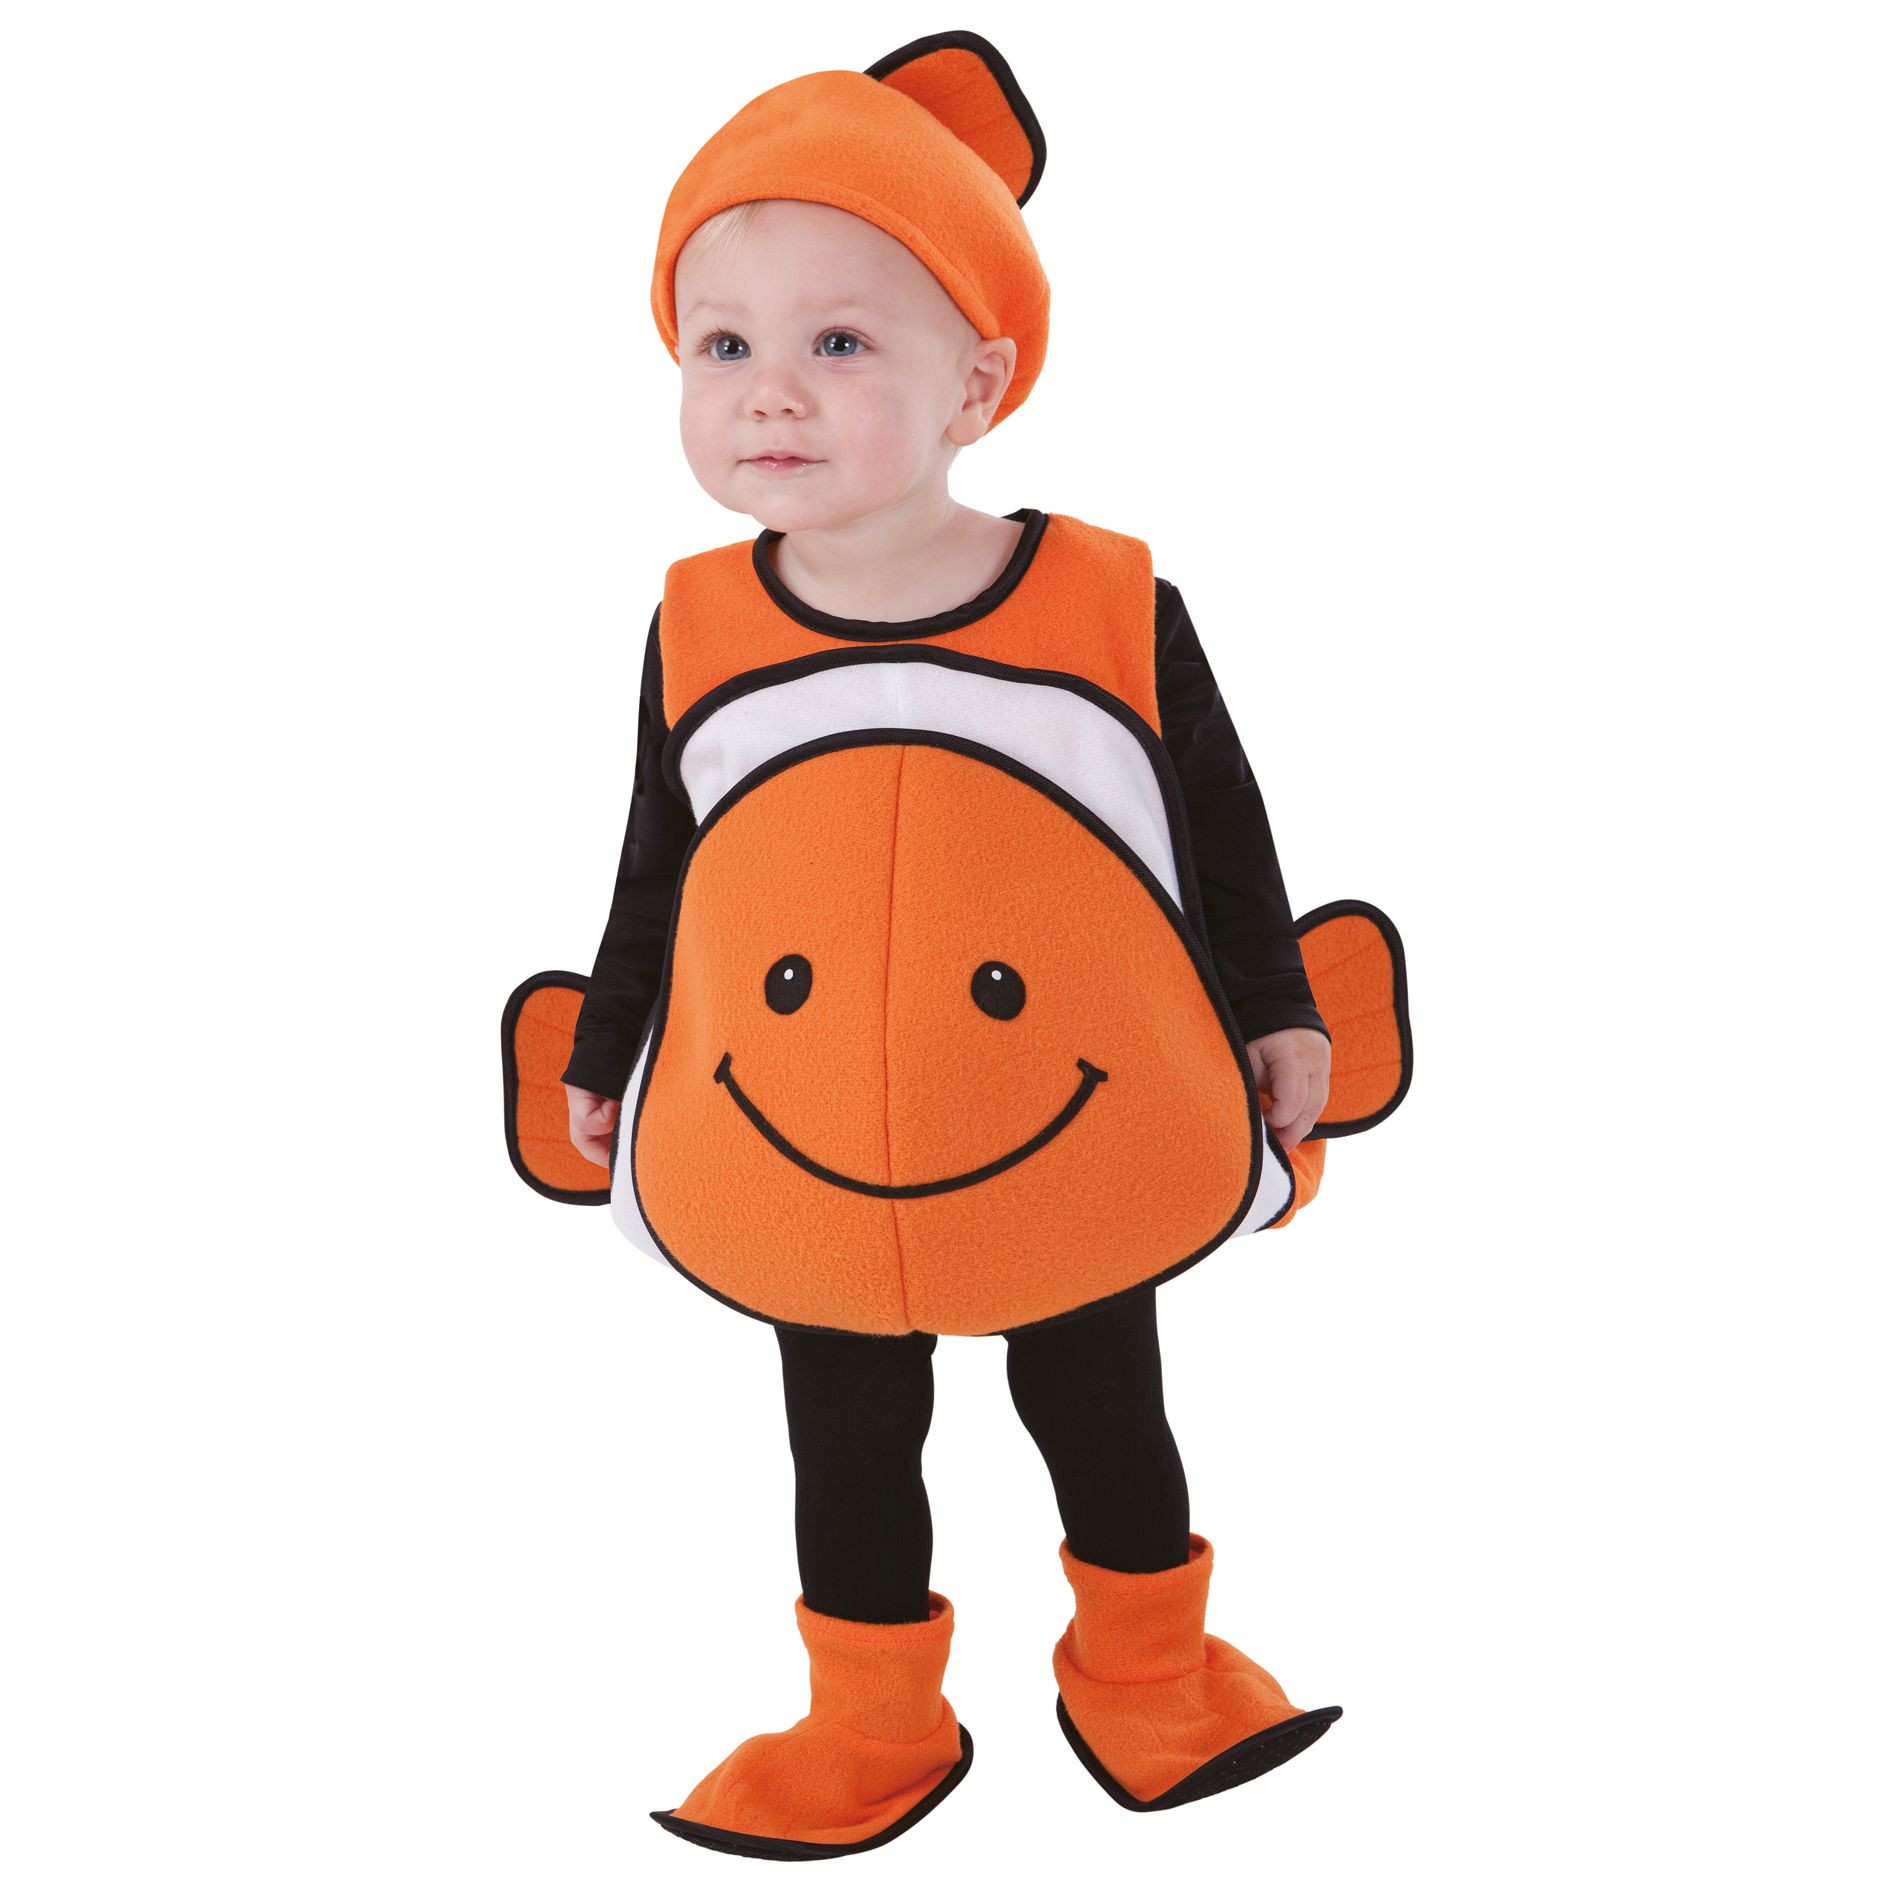 35 Ideas for Diy Nemo Costume - Home, Family, Style and Art Ideas